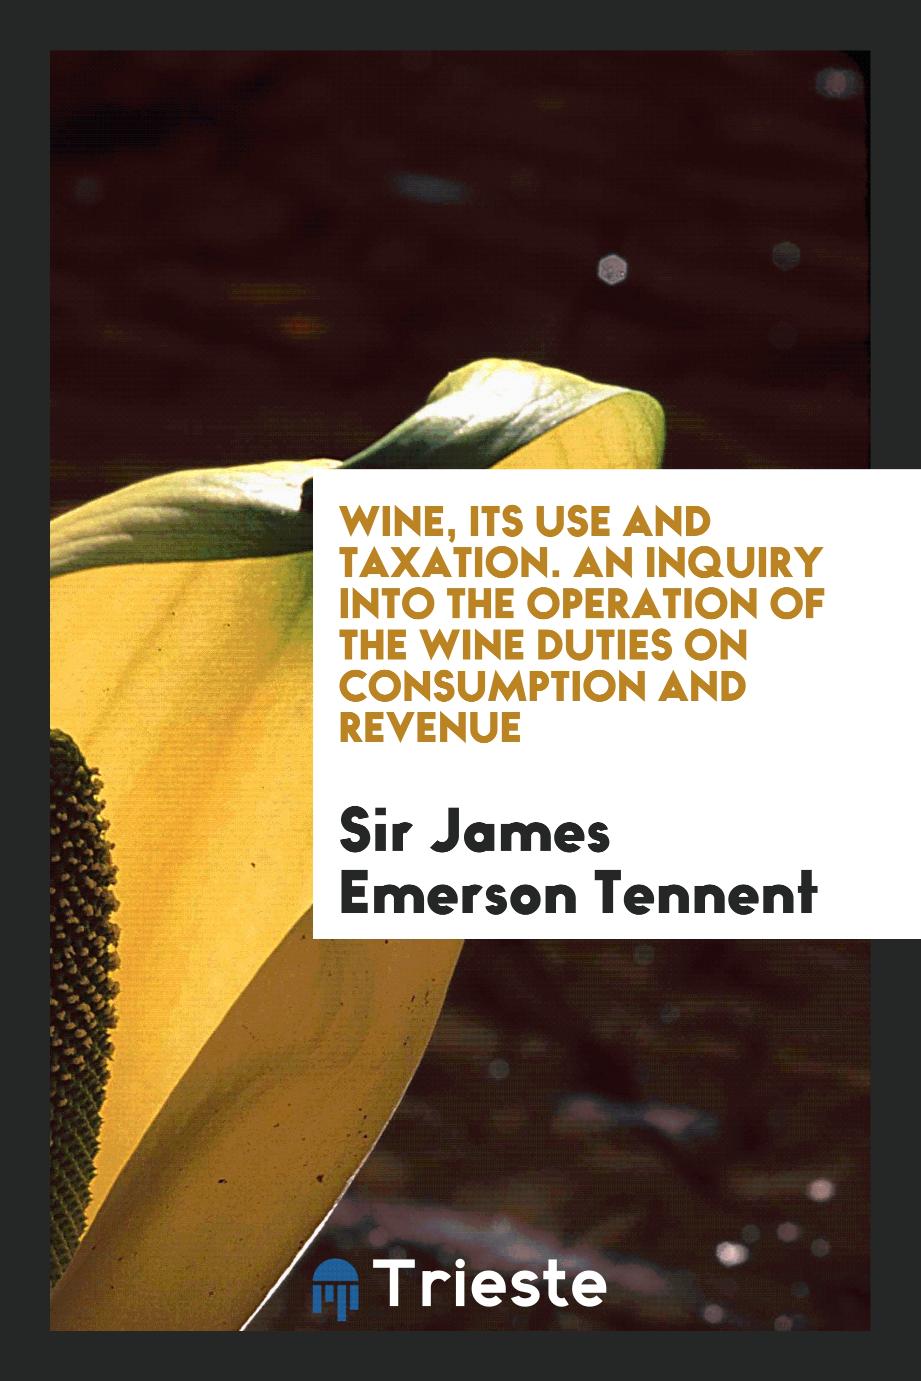 Wine, its use and taxation. An inquiry into the operation of the wine duties on consumption and revenue